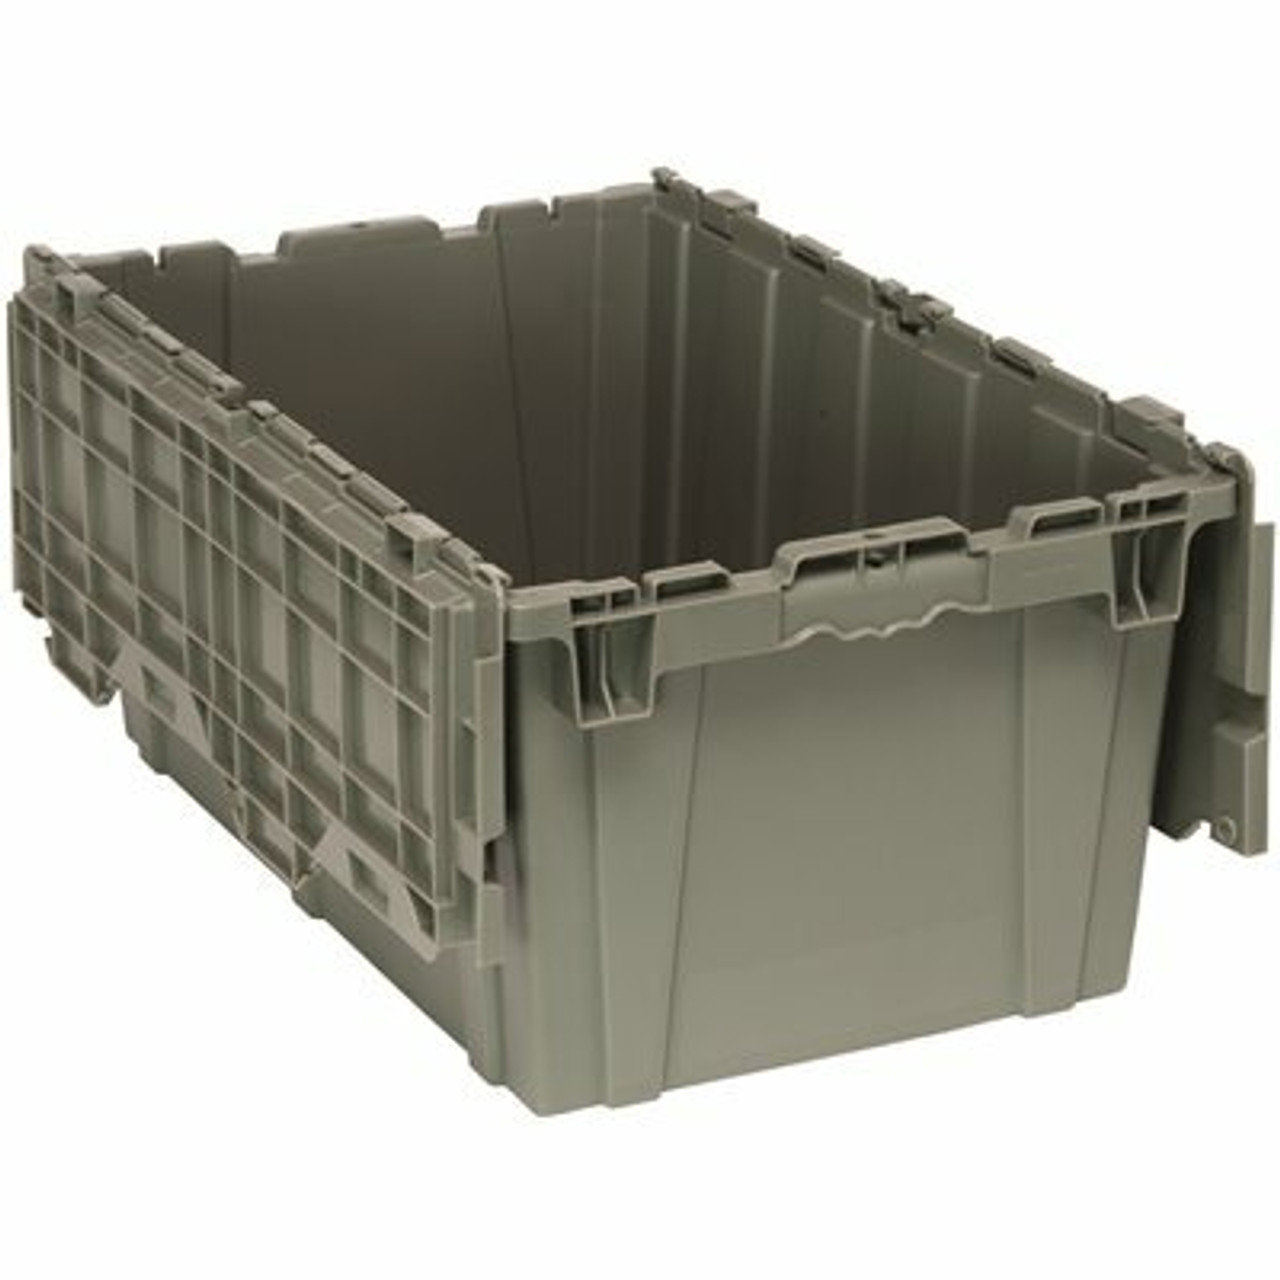 Quantum Storage Systems 27 In. X 17-3/4 In. 18.75 Gal. Attached Top Container Storage Bin In Gray